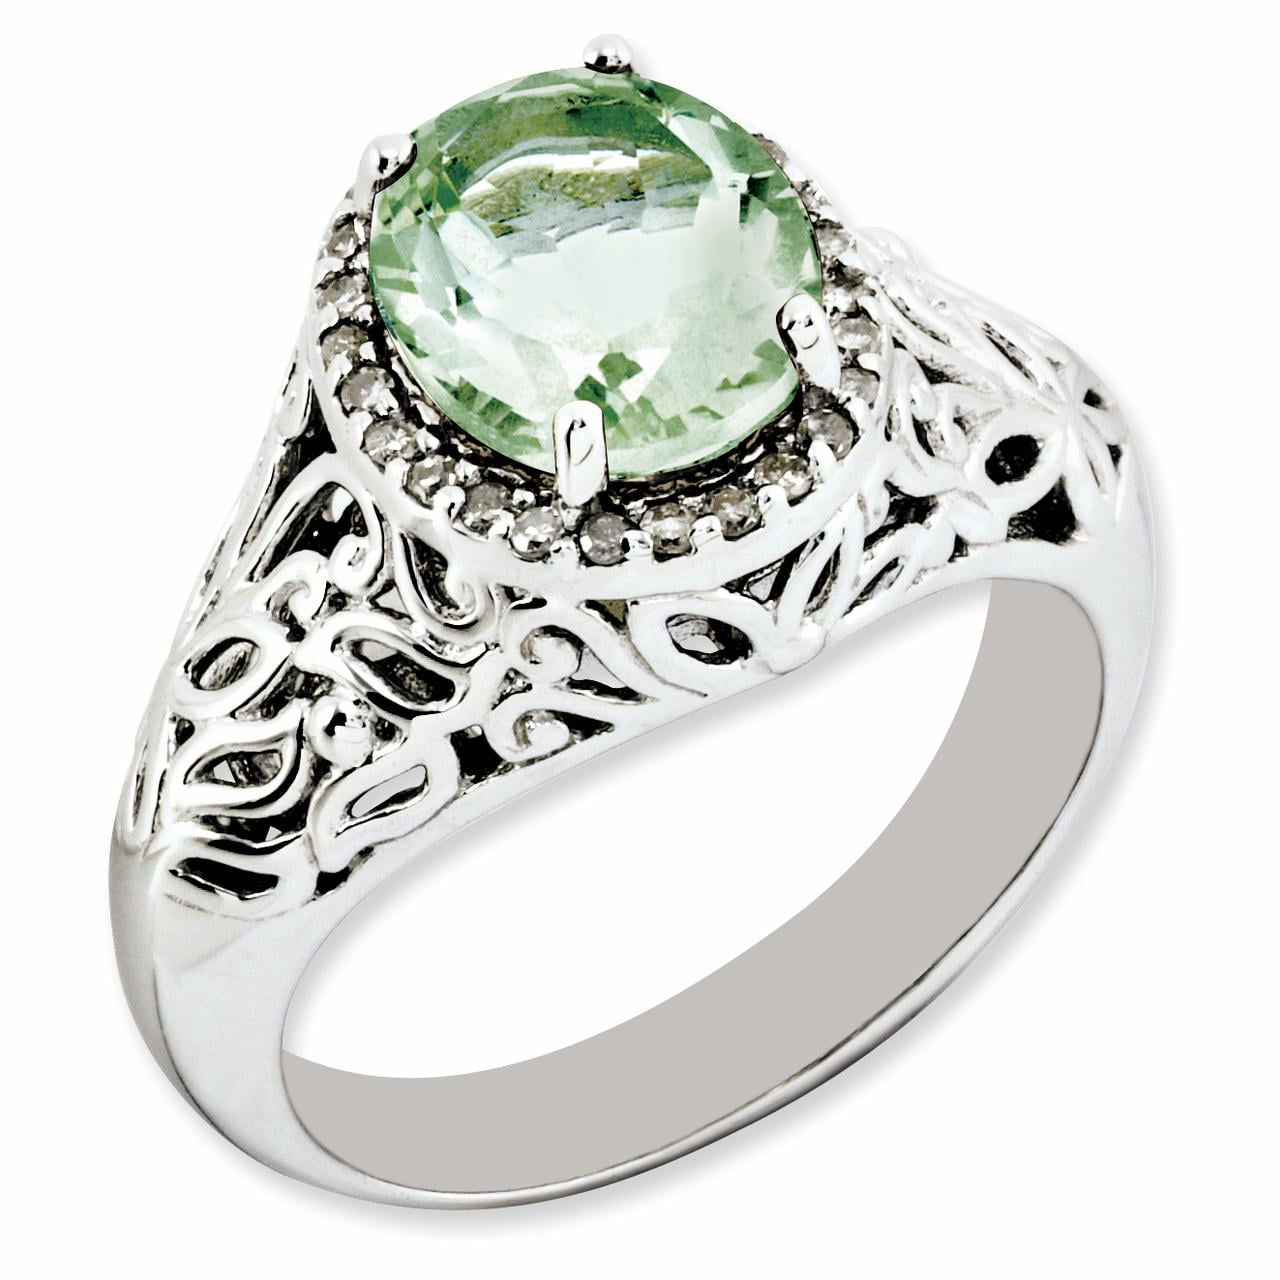 925 Sterling Silver Oval Diamond Green Quartz Band Ring Size 7.00 Gemstone Fine Jewelry For Women Gifts For Her 